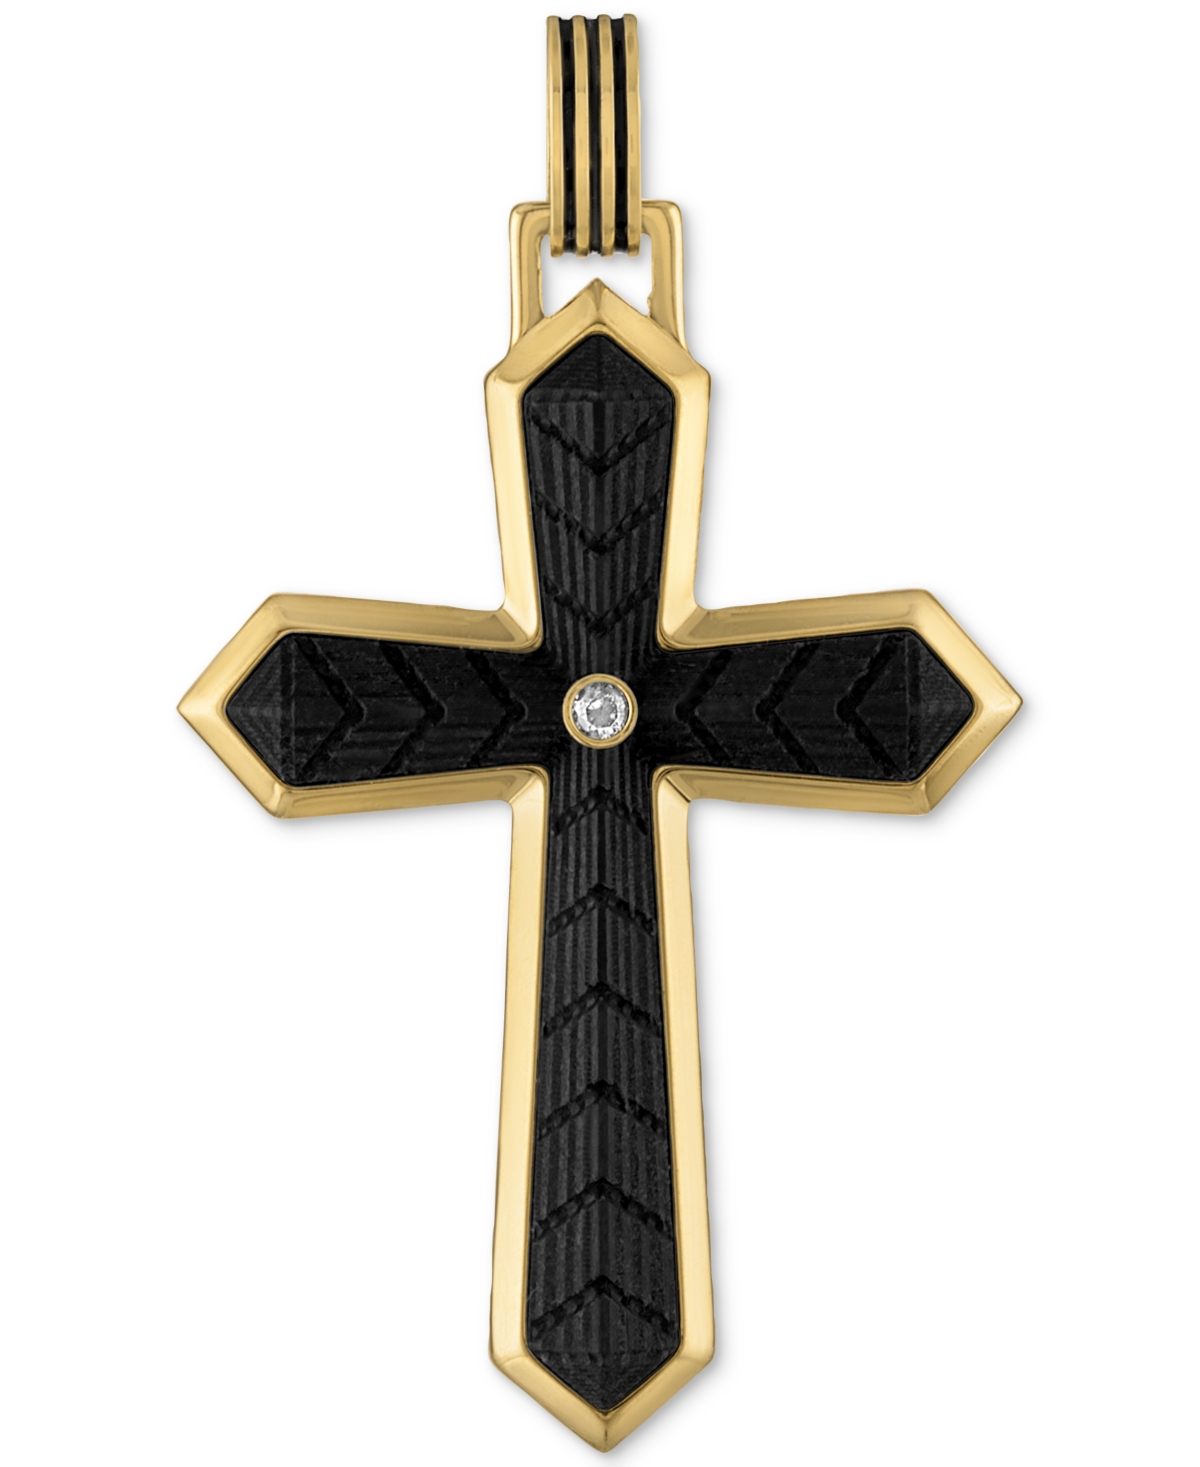 Cubic Zirconia Carbon Fiber Cross Pendant in 14k Gold-Plated Sterling Silver, Created for Macy's - Gold Over Silver